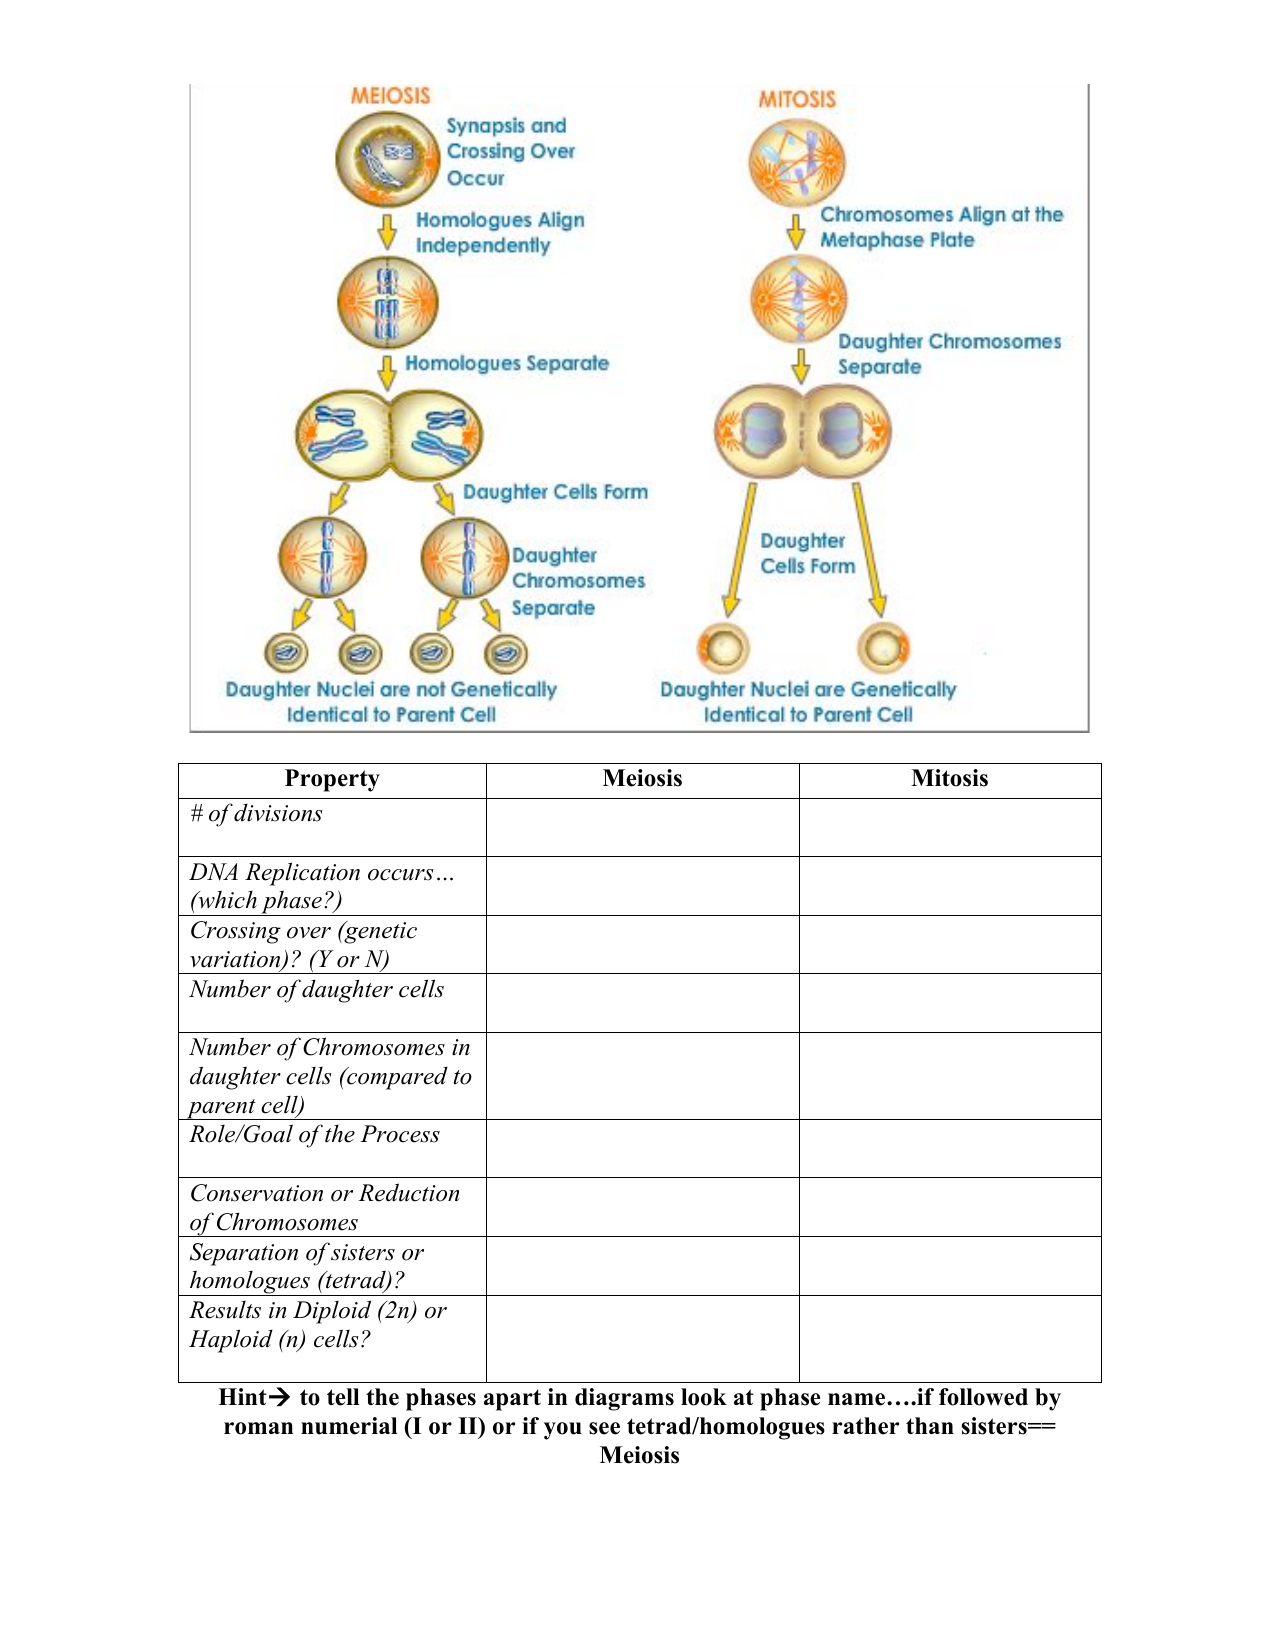 mitosis-and-meiosis-worksheet-answer-key-cell-division-mitosis-and